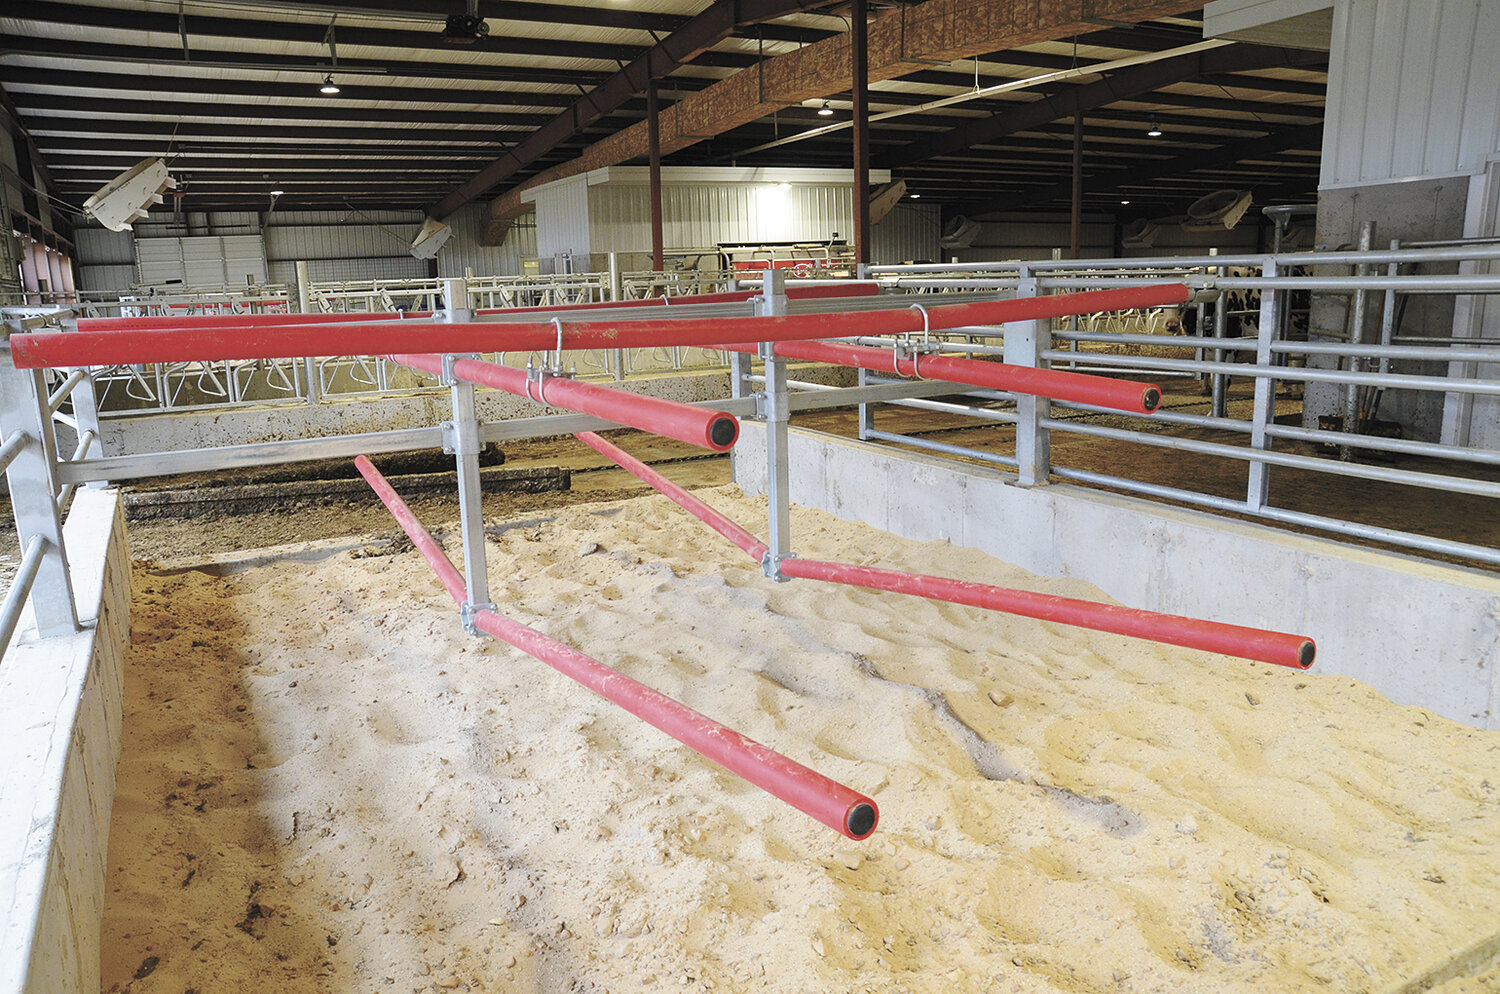 The Haags installed flex stalls in all of the pens in their new robotic barn on their farm near Mount Horeb, Wisconsin. The Haags said they like that the stalls give cows more lunge room.